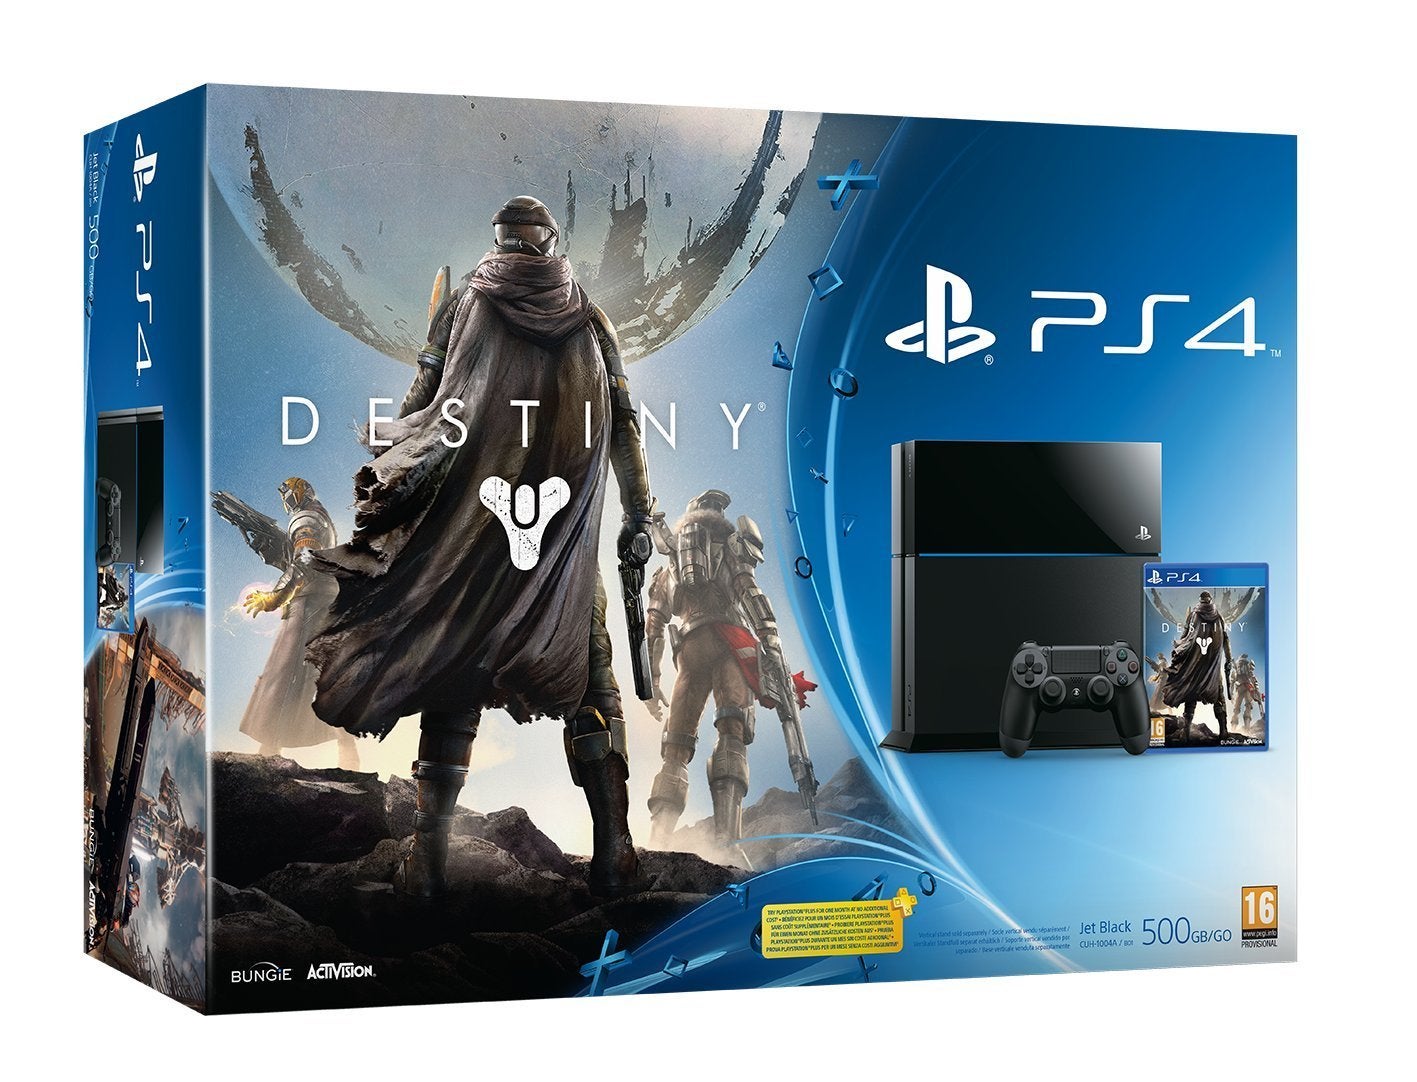 Image for Grab a PS4 and Destiny for £329 from Amazon UK